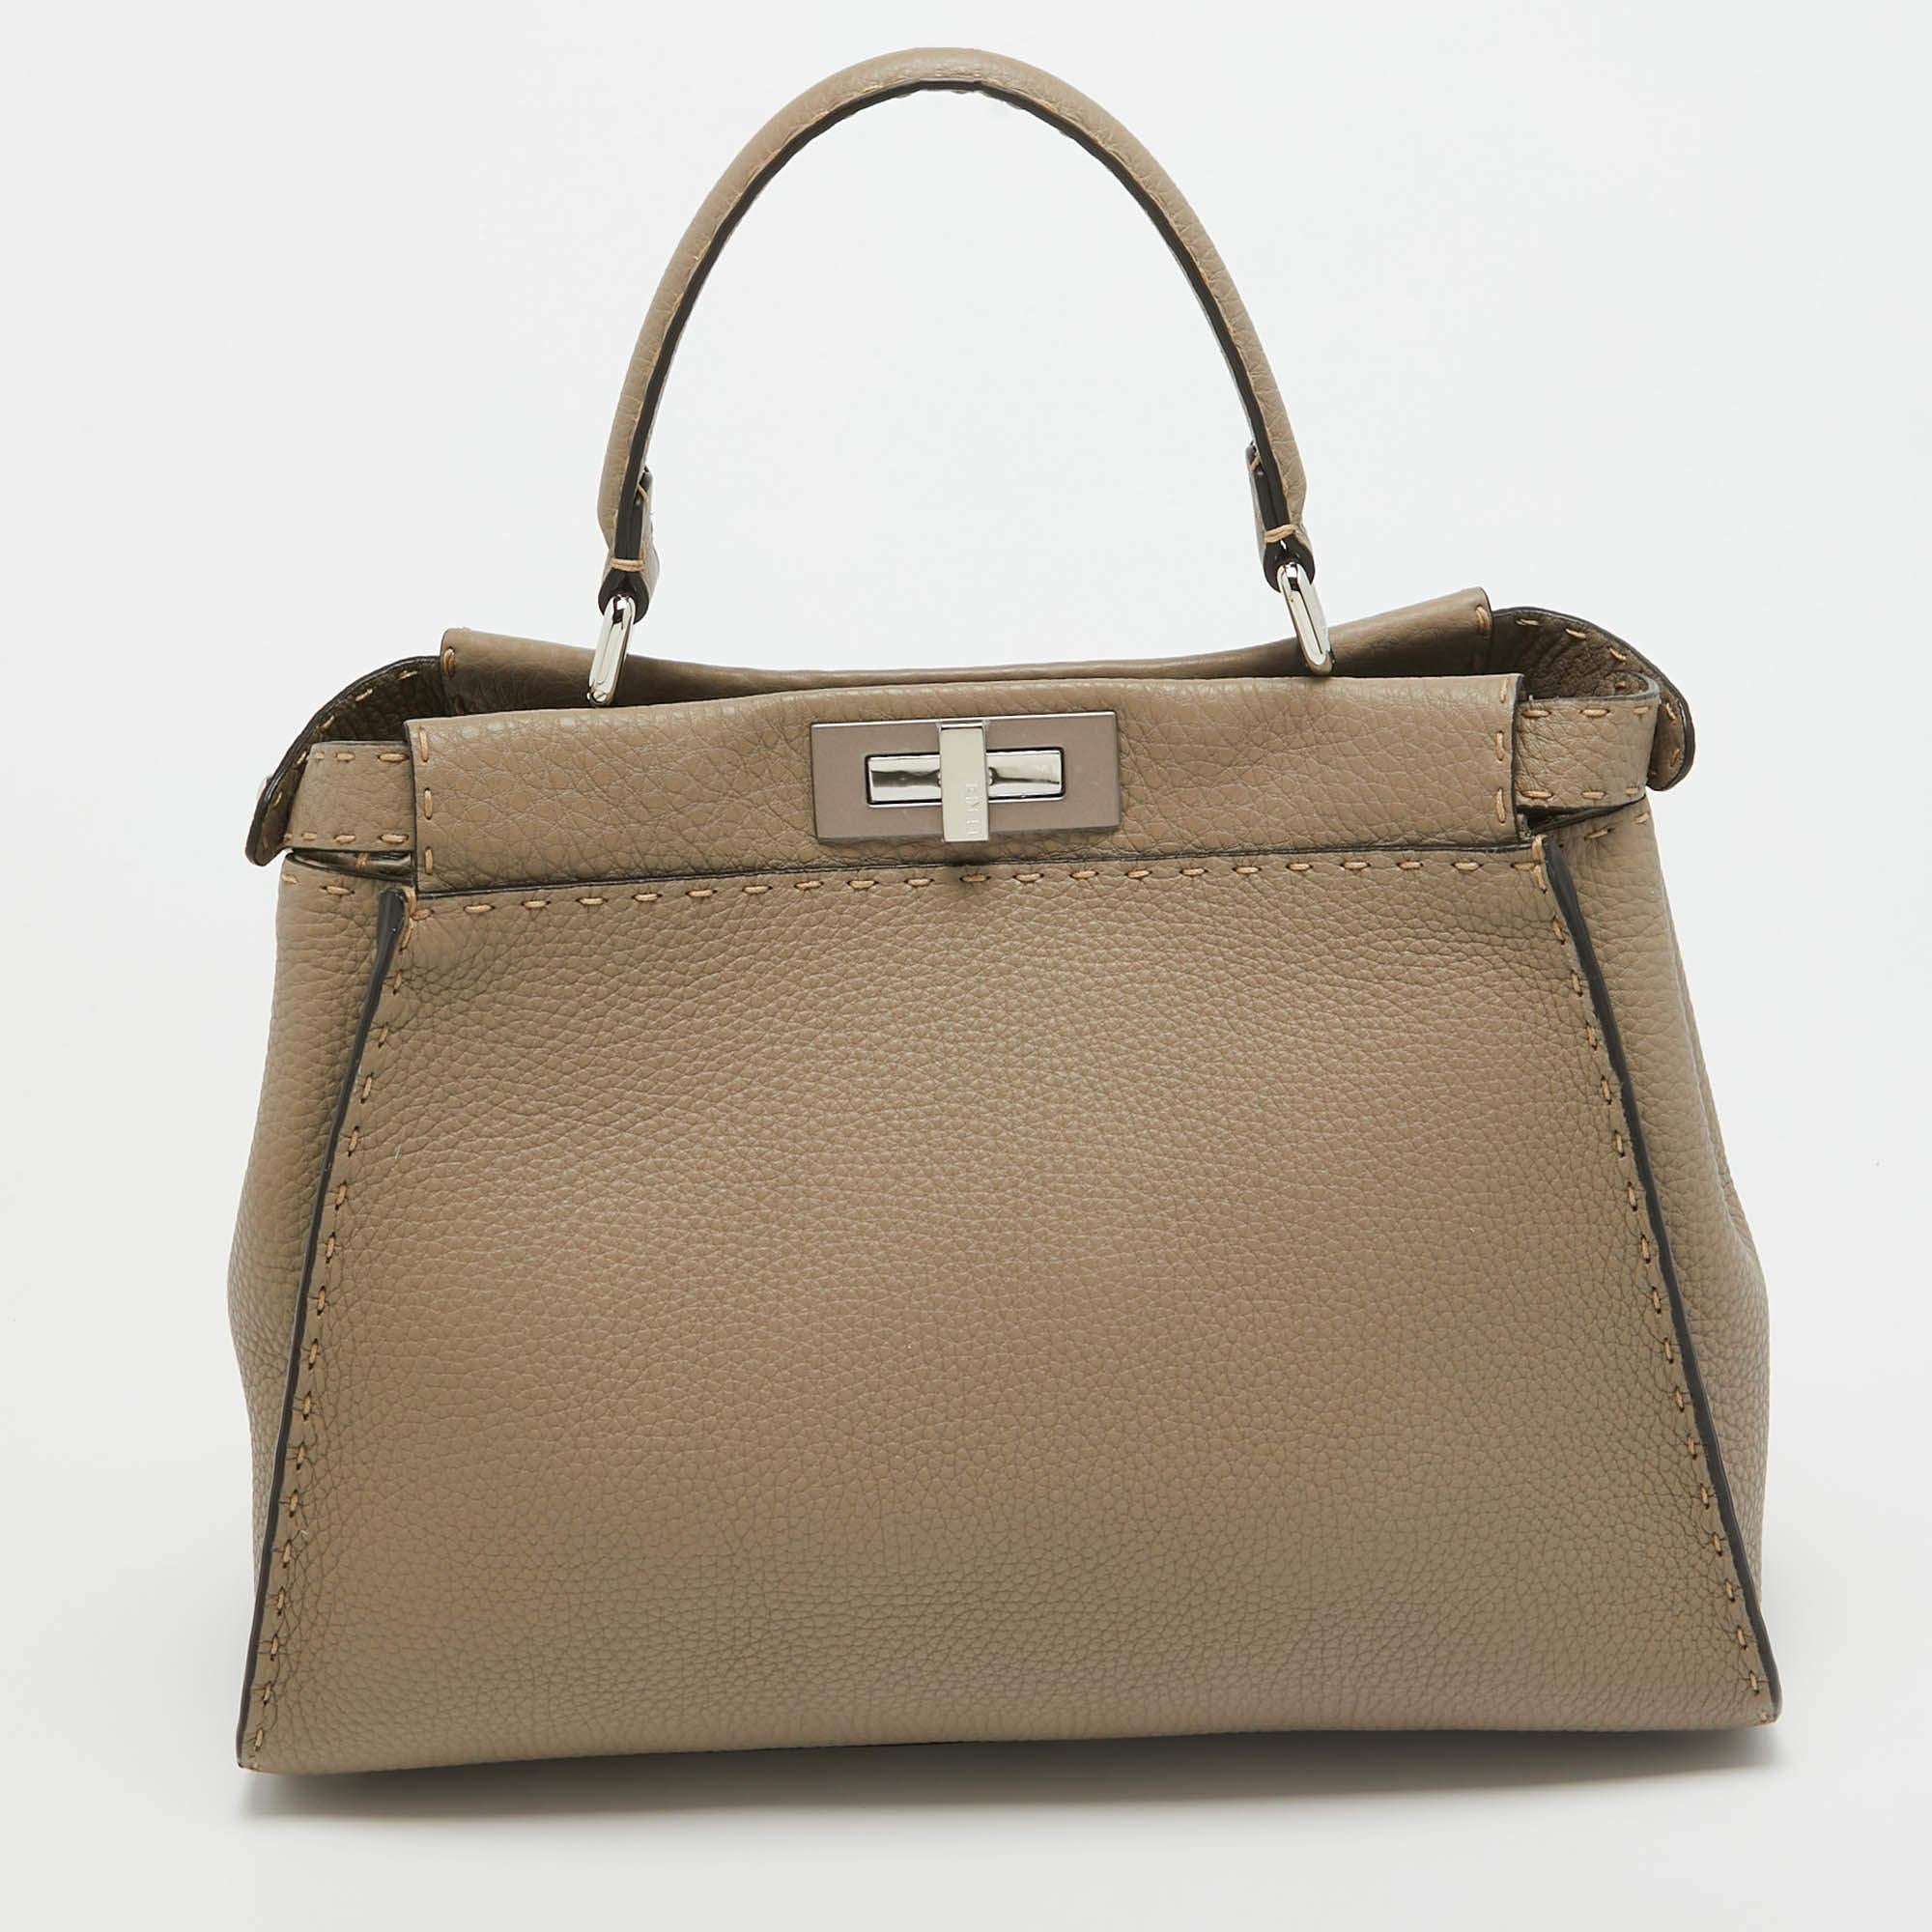 This exquisite Peekaboo from Fendi is highly coveted, and since its birth in 2009, it has swayed us with its shape, design, and beauty. This version comes meticulously crafted from leather, designed with a top handle for you to swing it, and